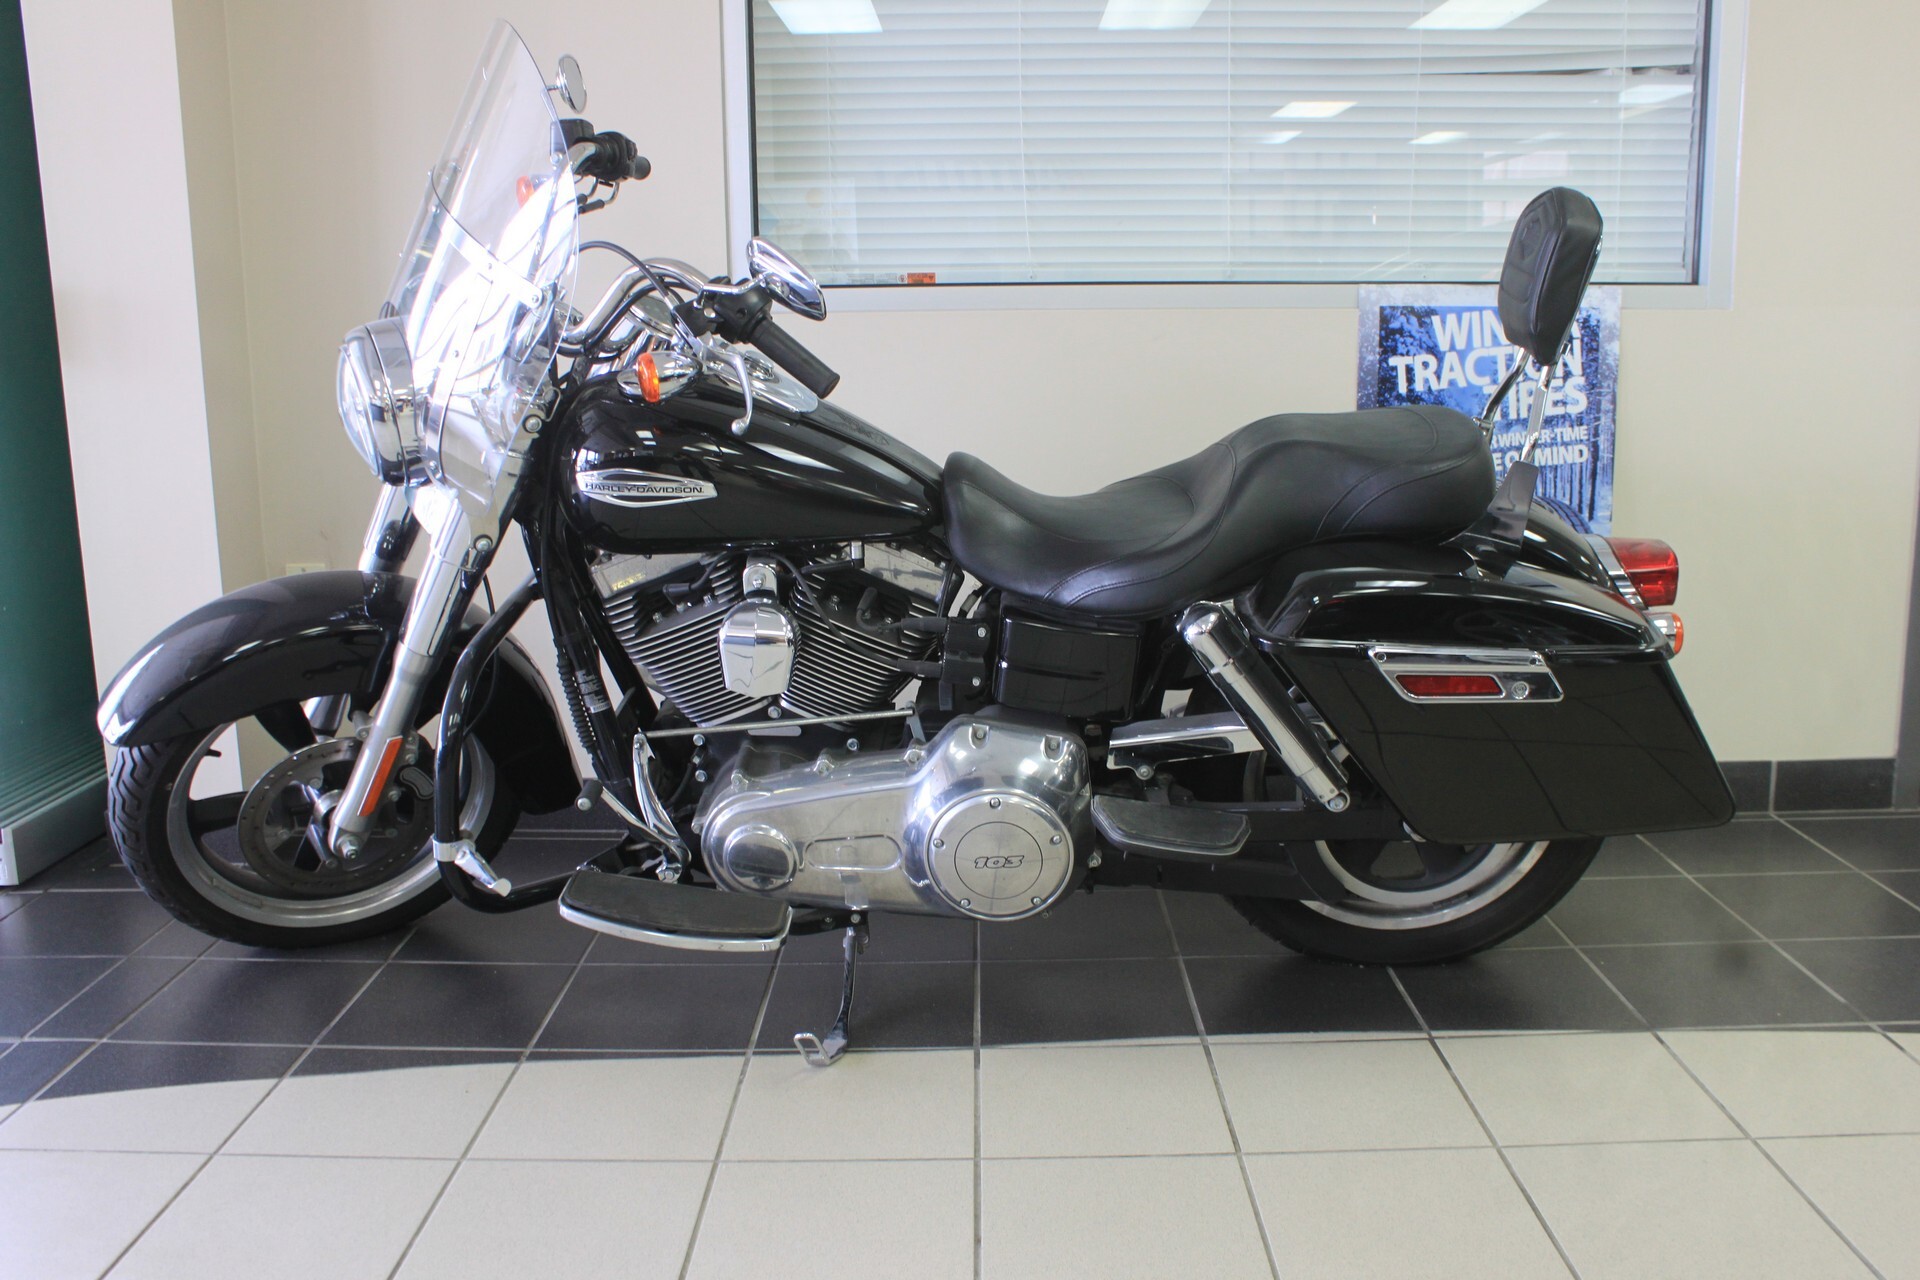 2012 Harley-Davidson FXDWG Dyna Glide F103*ONLY 10K KMS*CLEAN & MINT CONDITION*